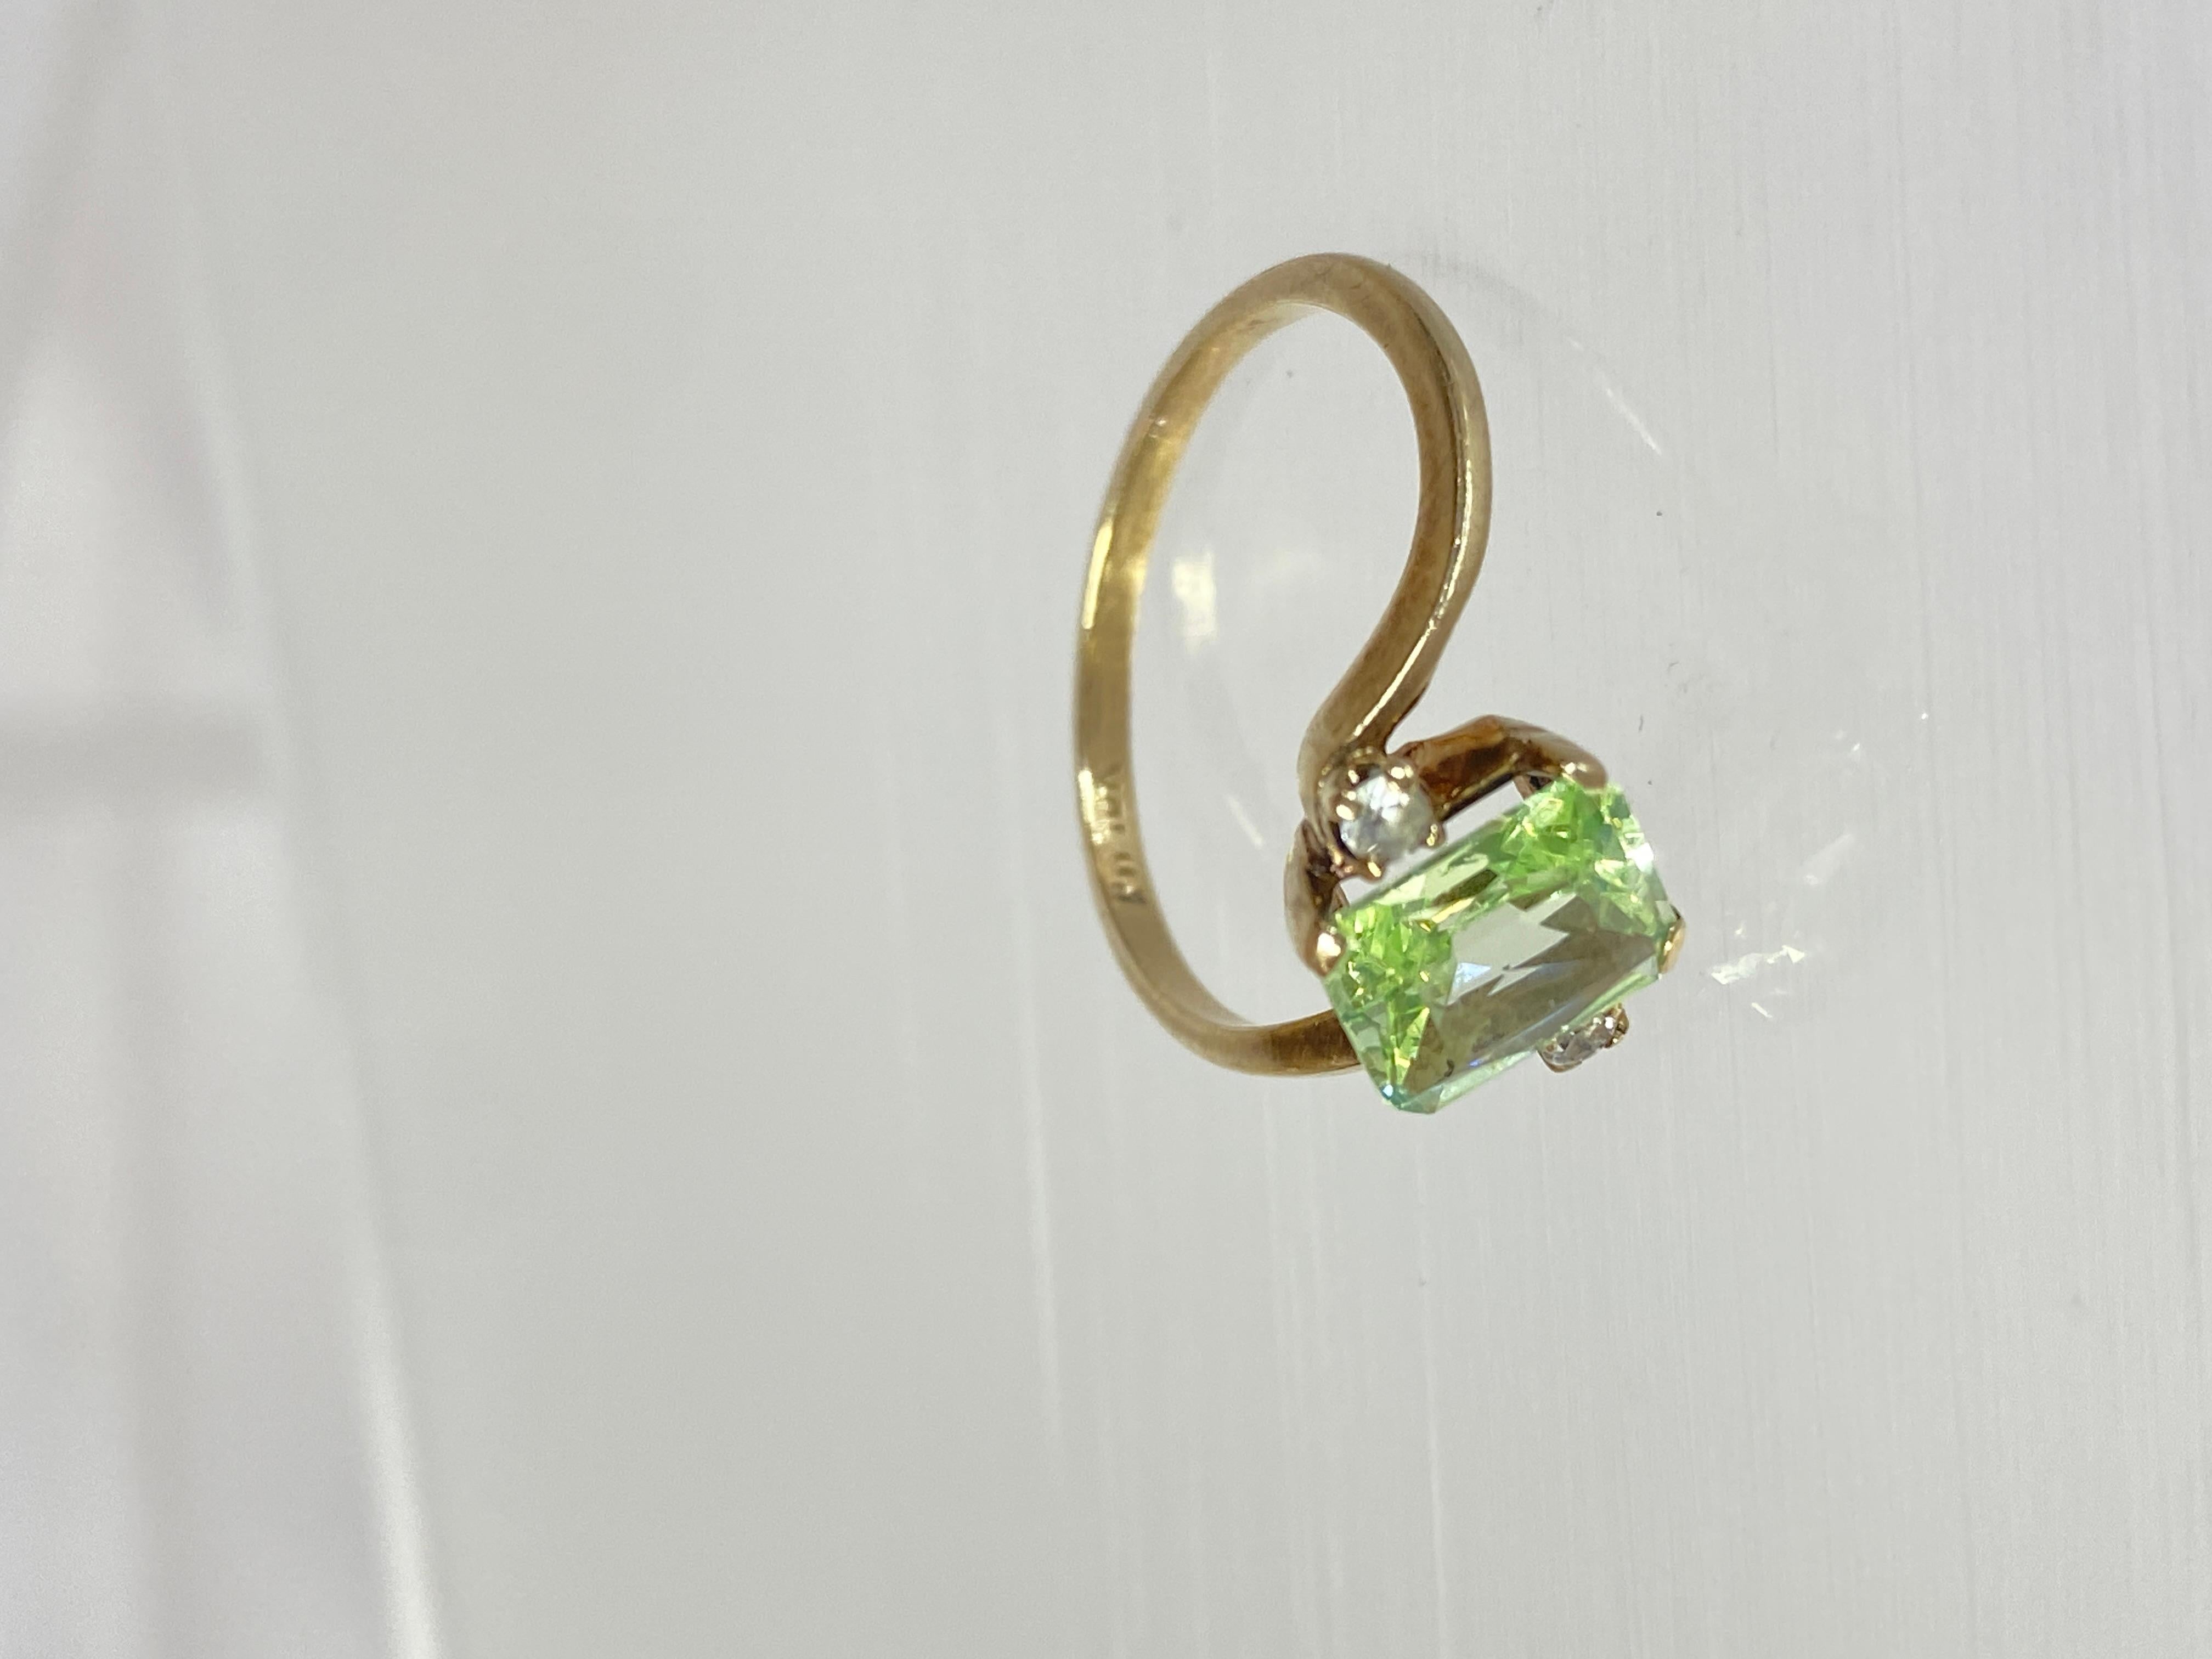 10K Yellow Gold Old Fashioned Emerald Cut Green Beryl Solitaire Ring Size 8.25 5